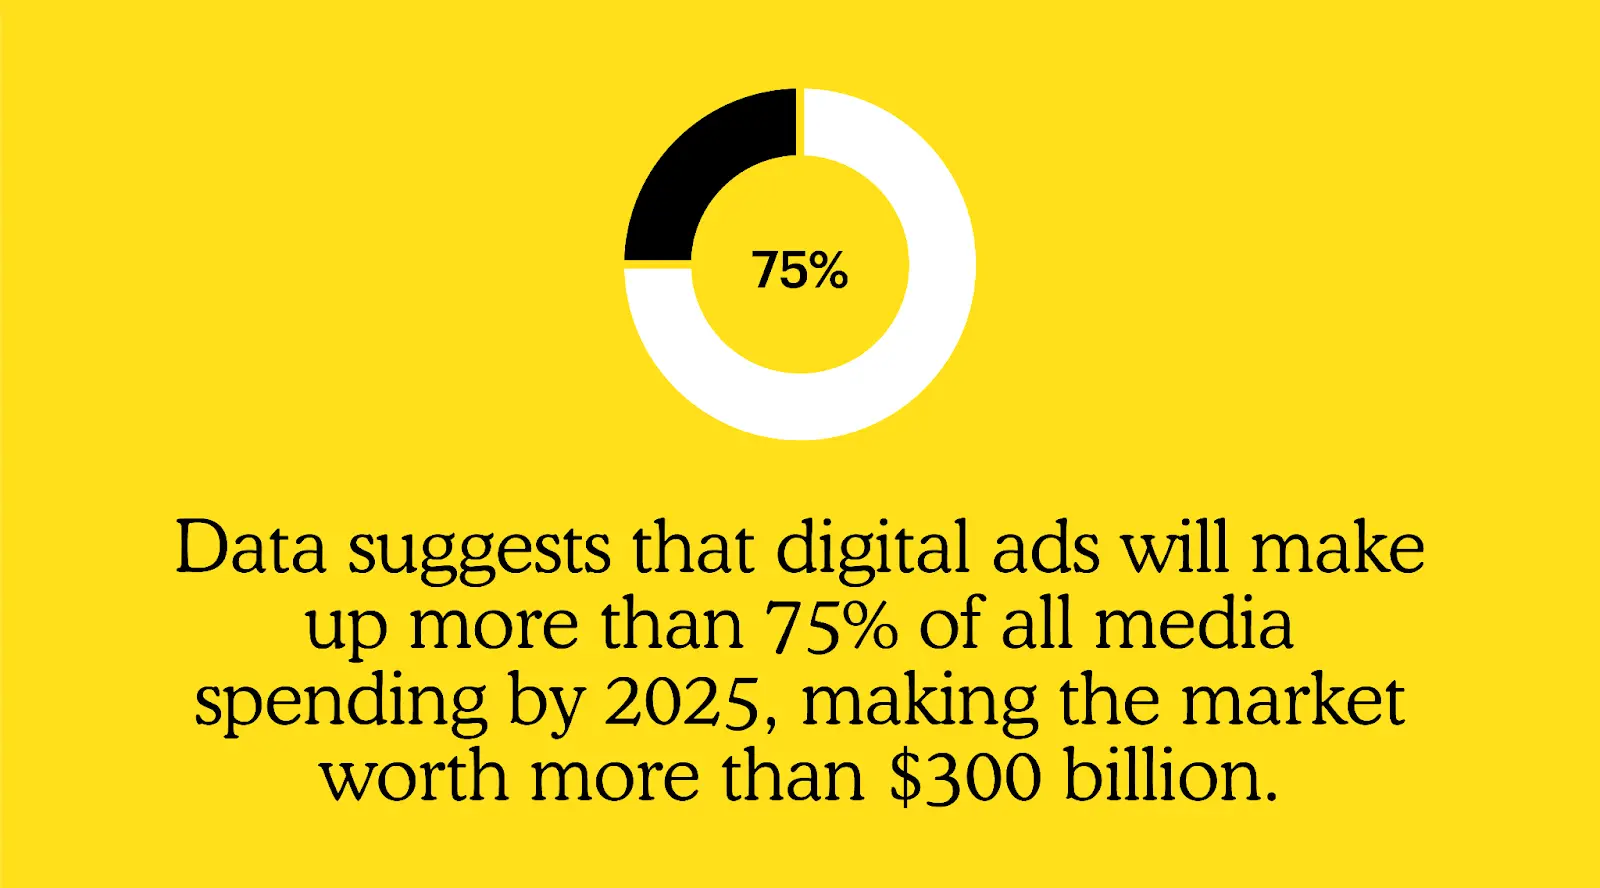 Data suggests that digital ads will make up more than 75% of all social media spending by 2025